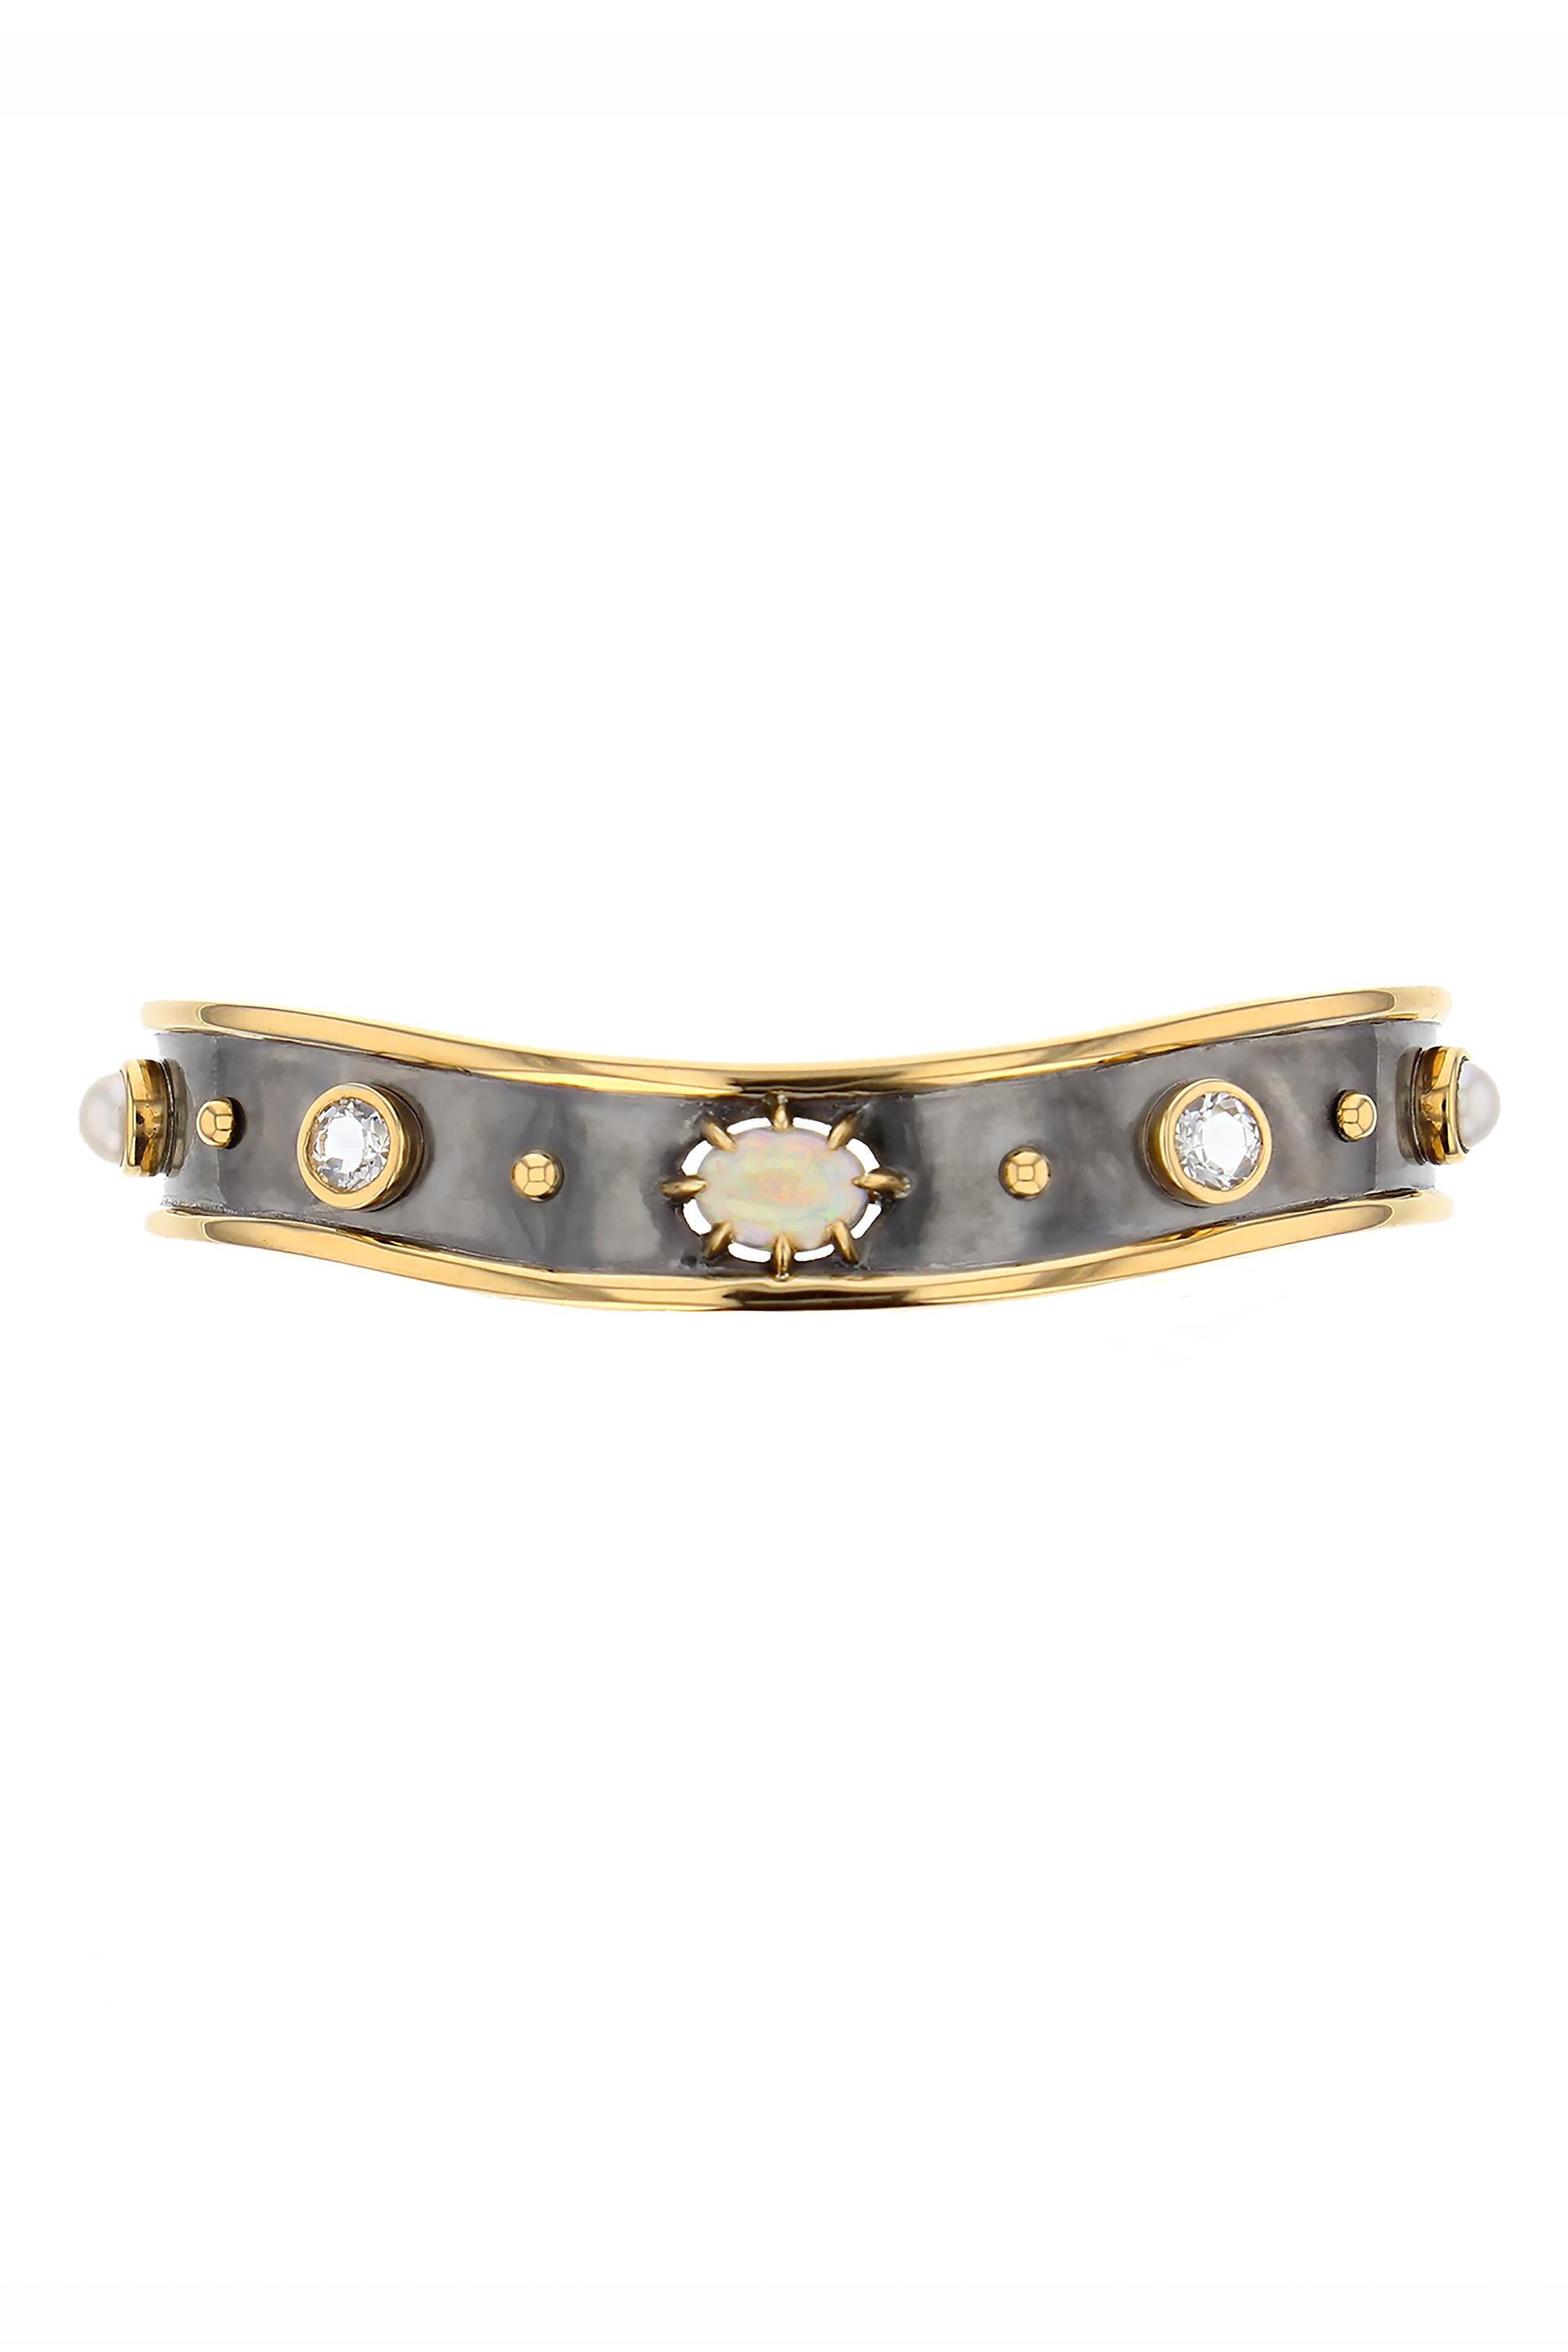 Opal, Sapphire and Akoya Pearls Bandeau Bracelet in 18k Yellow Gold by Elie Top